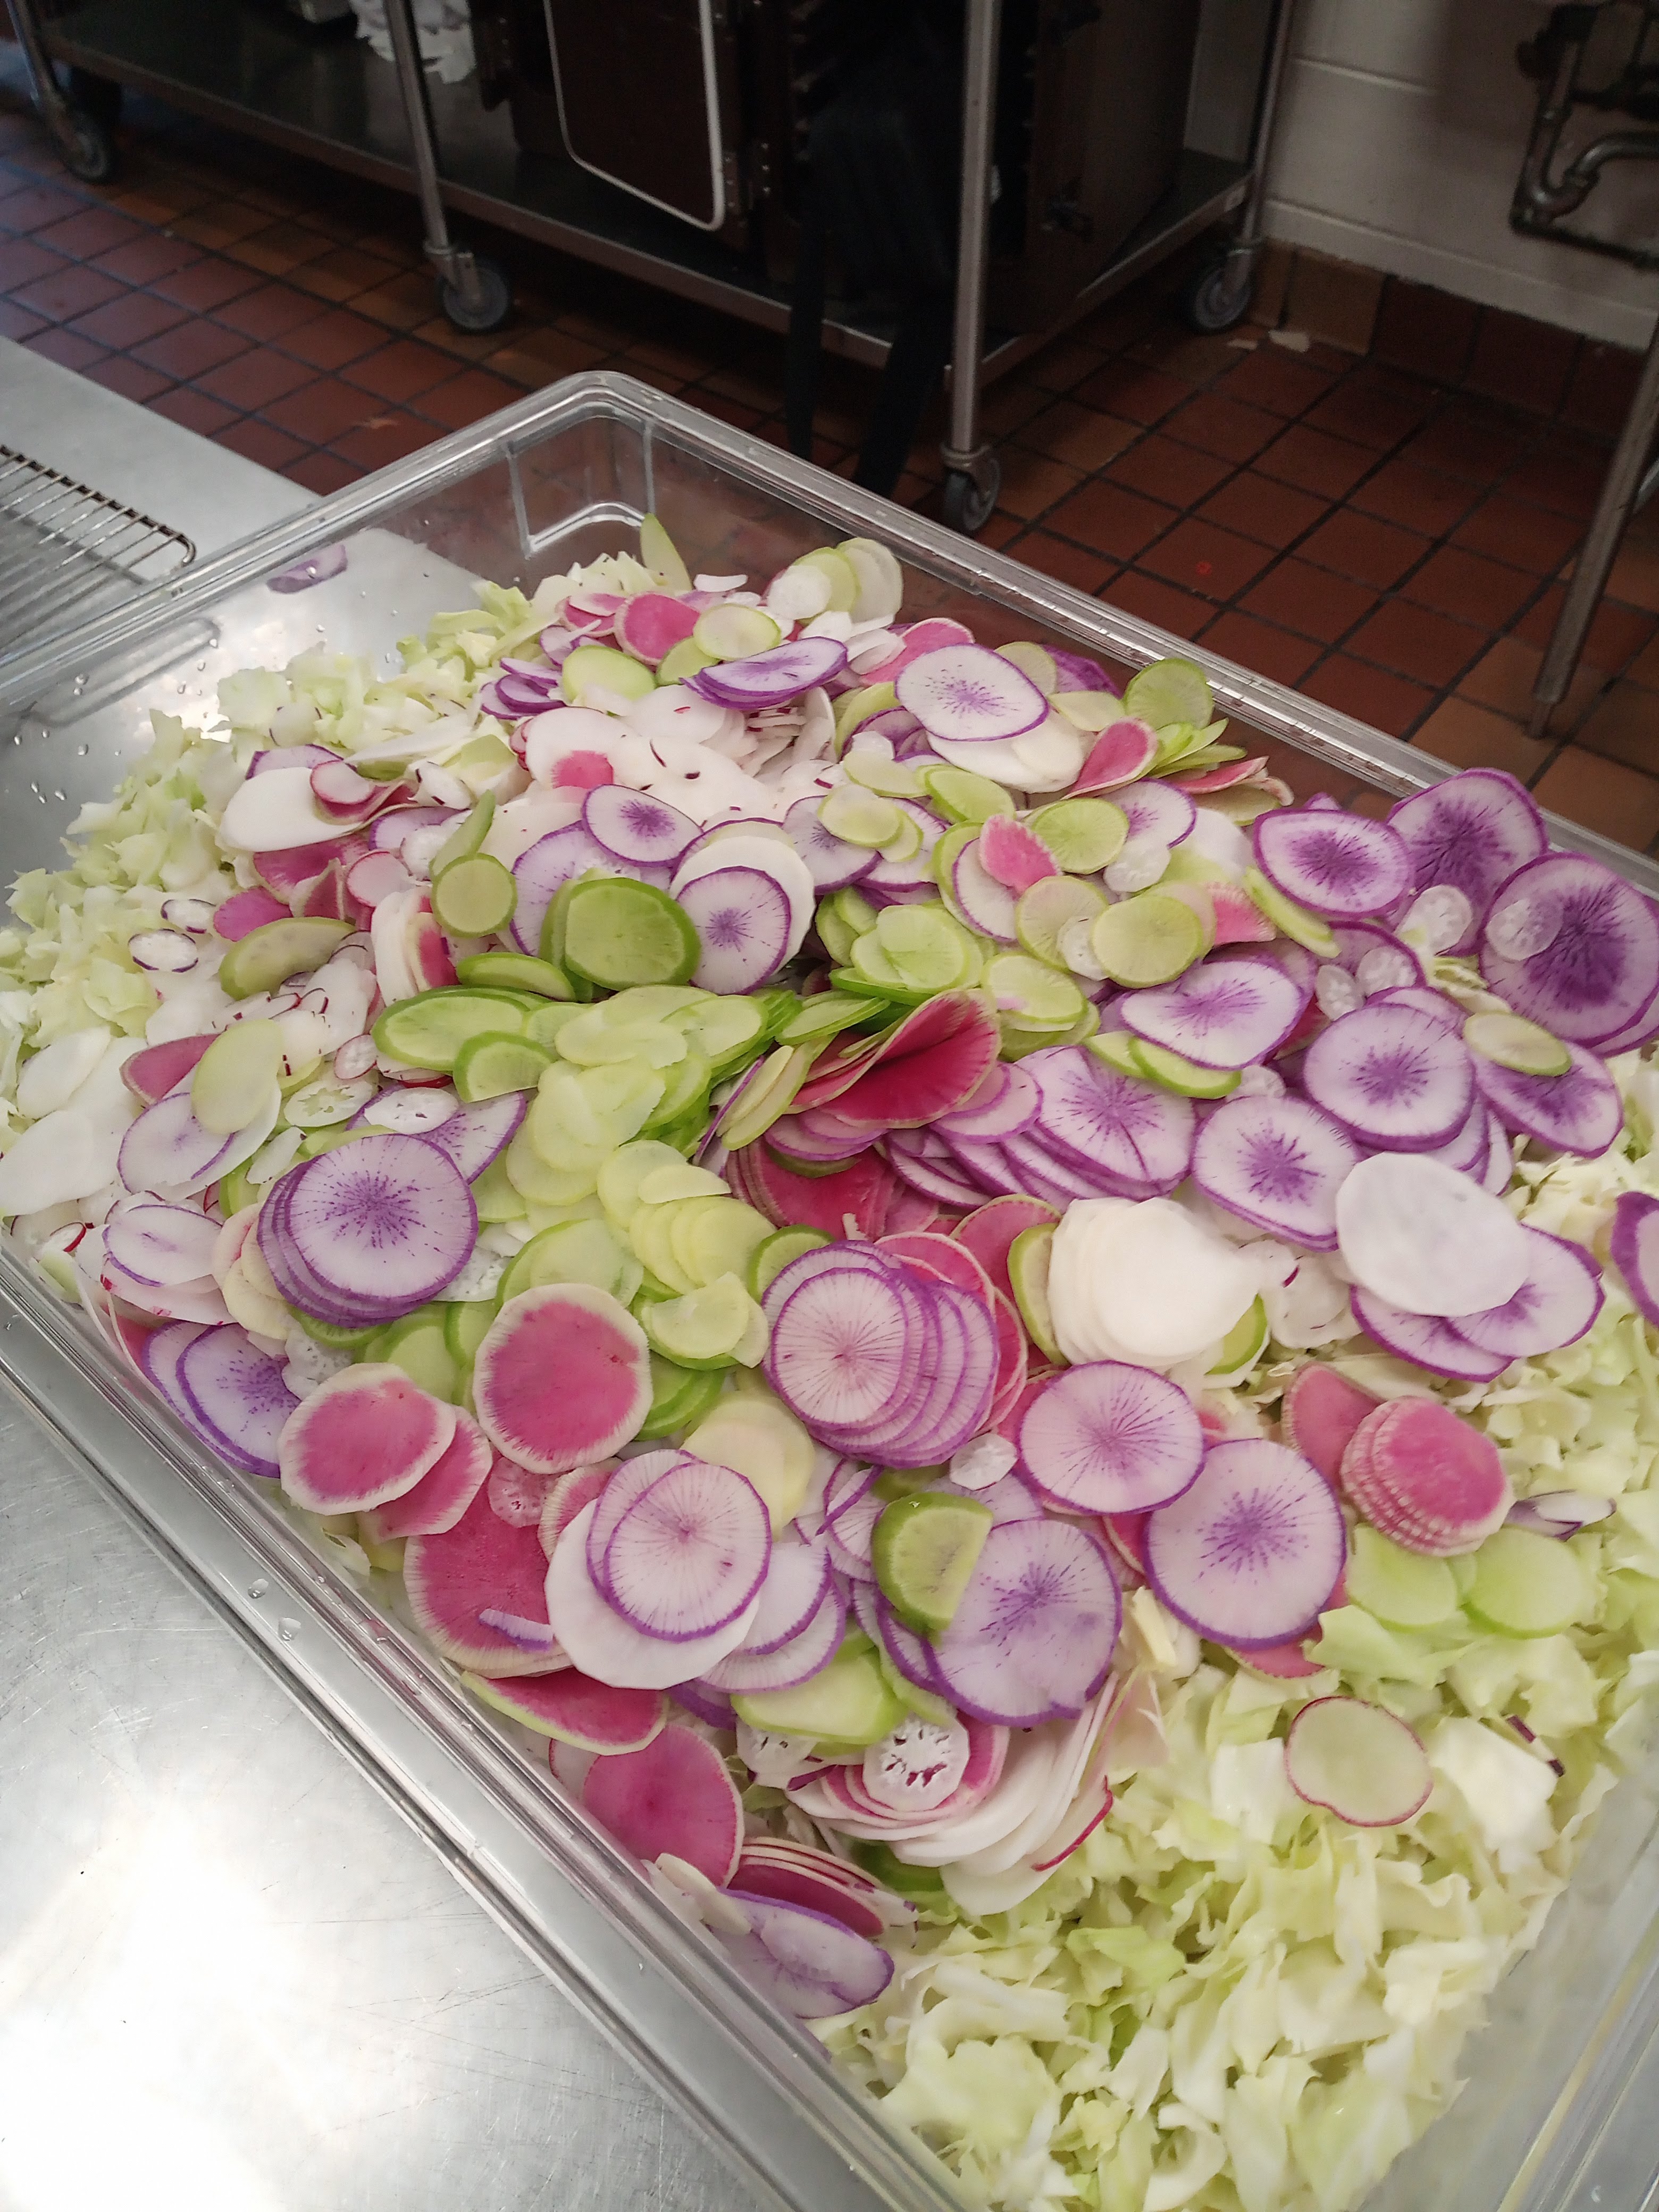 A large rectangle plastic bin filled with thinly sliced purple pink white and green radishes and chopped cabbage